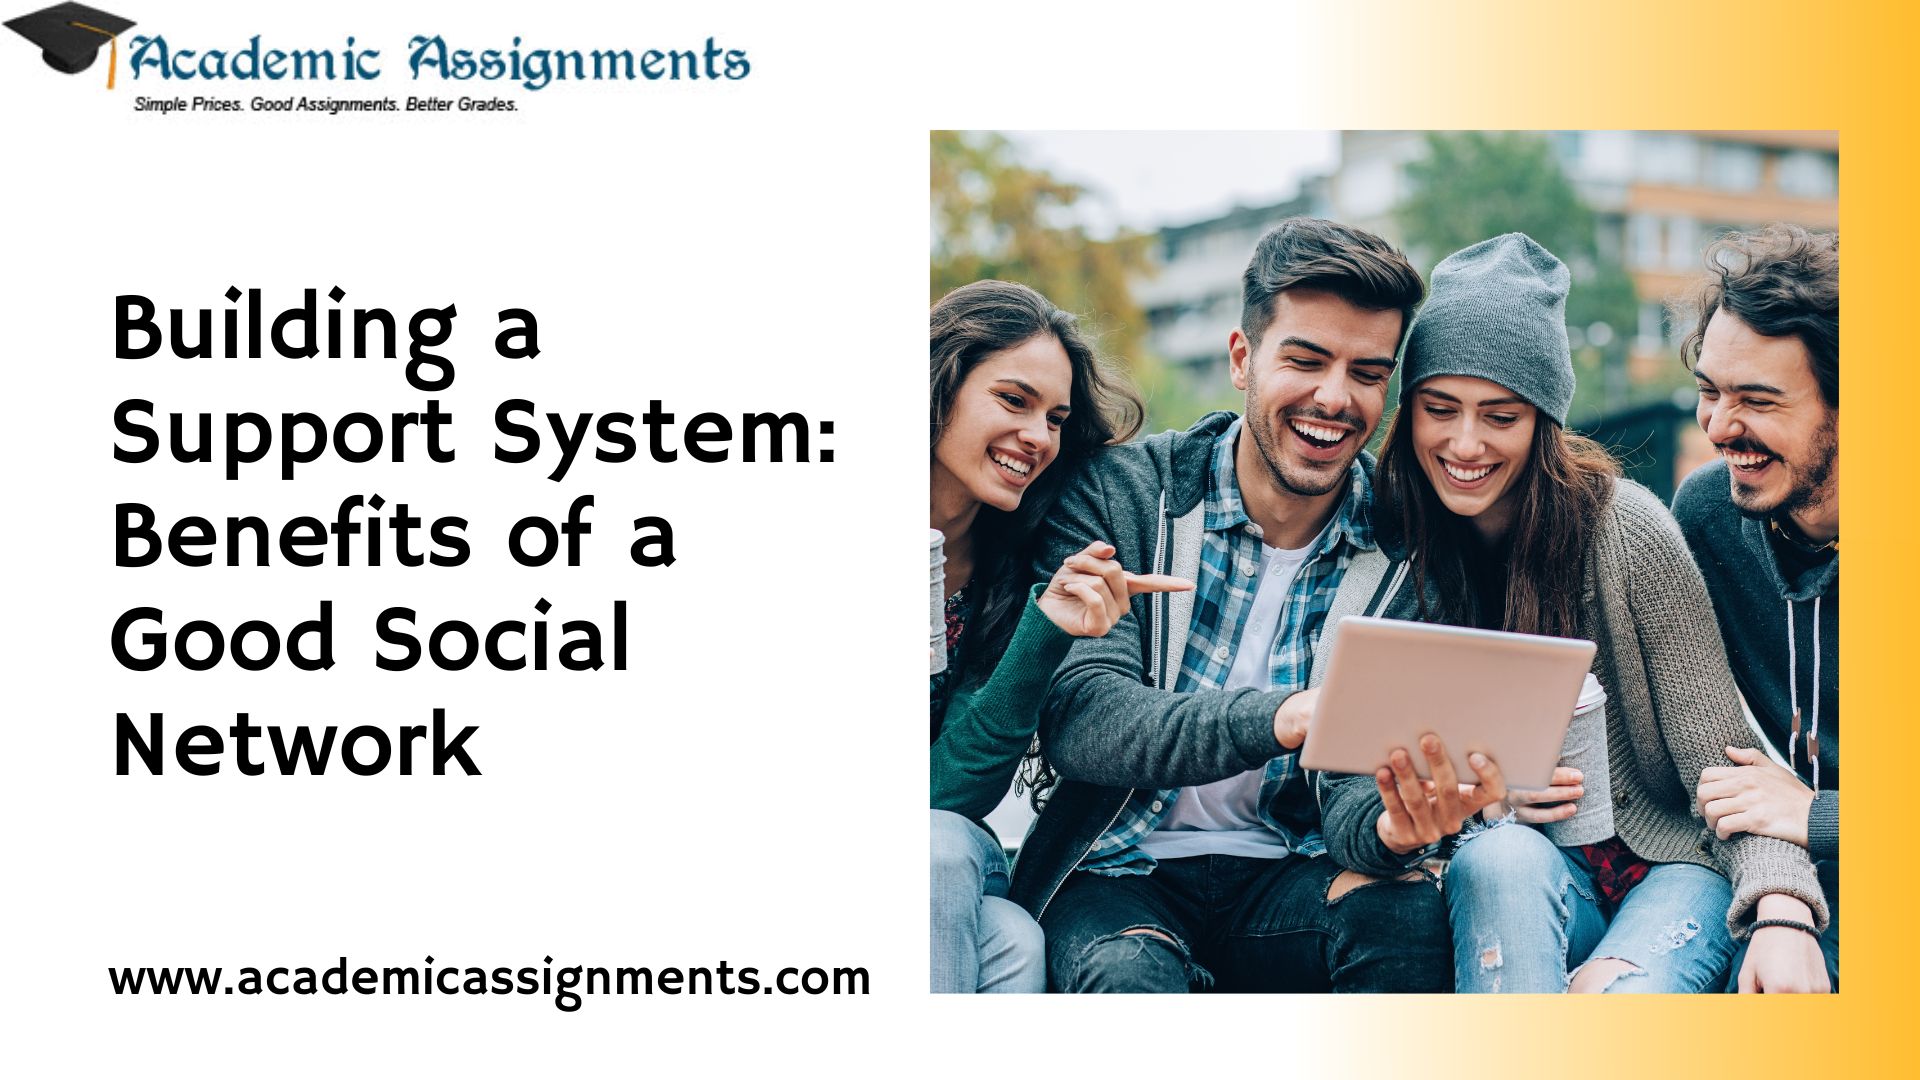 Building a Support System Benefits of a Good Social Network